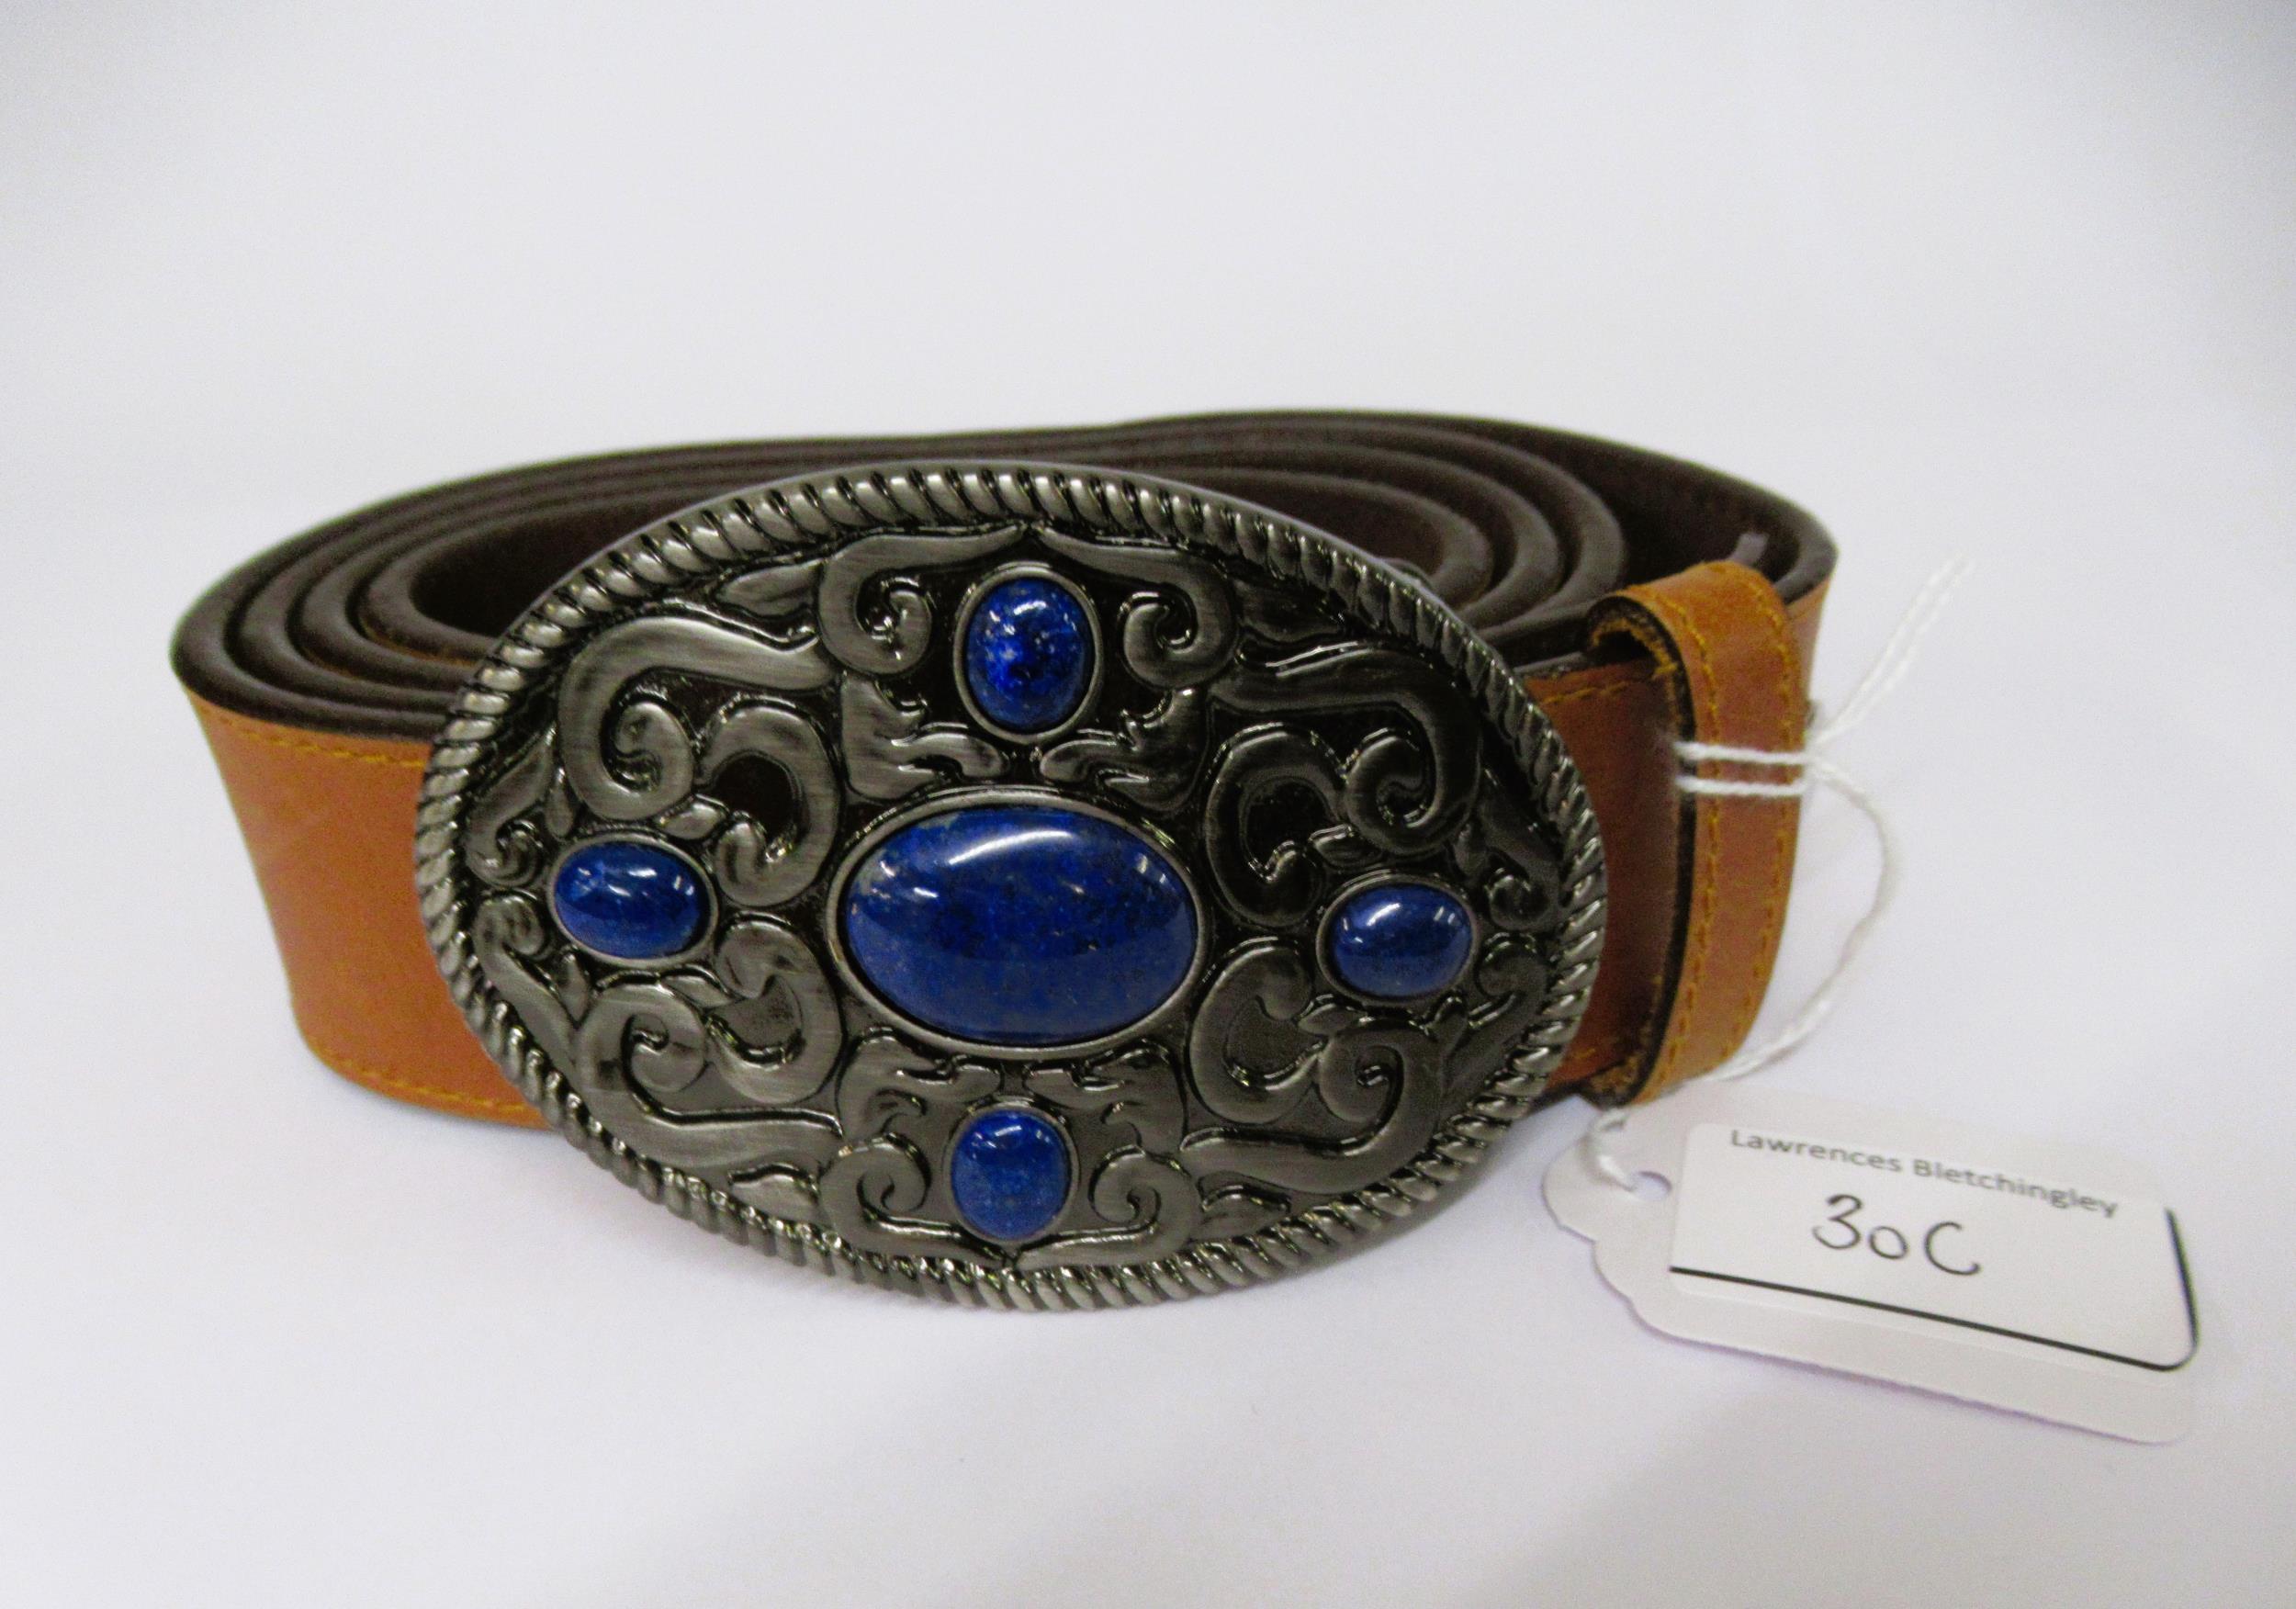 Leather belt with lapis lazuli inset buckle